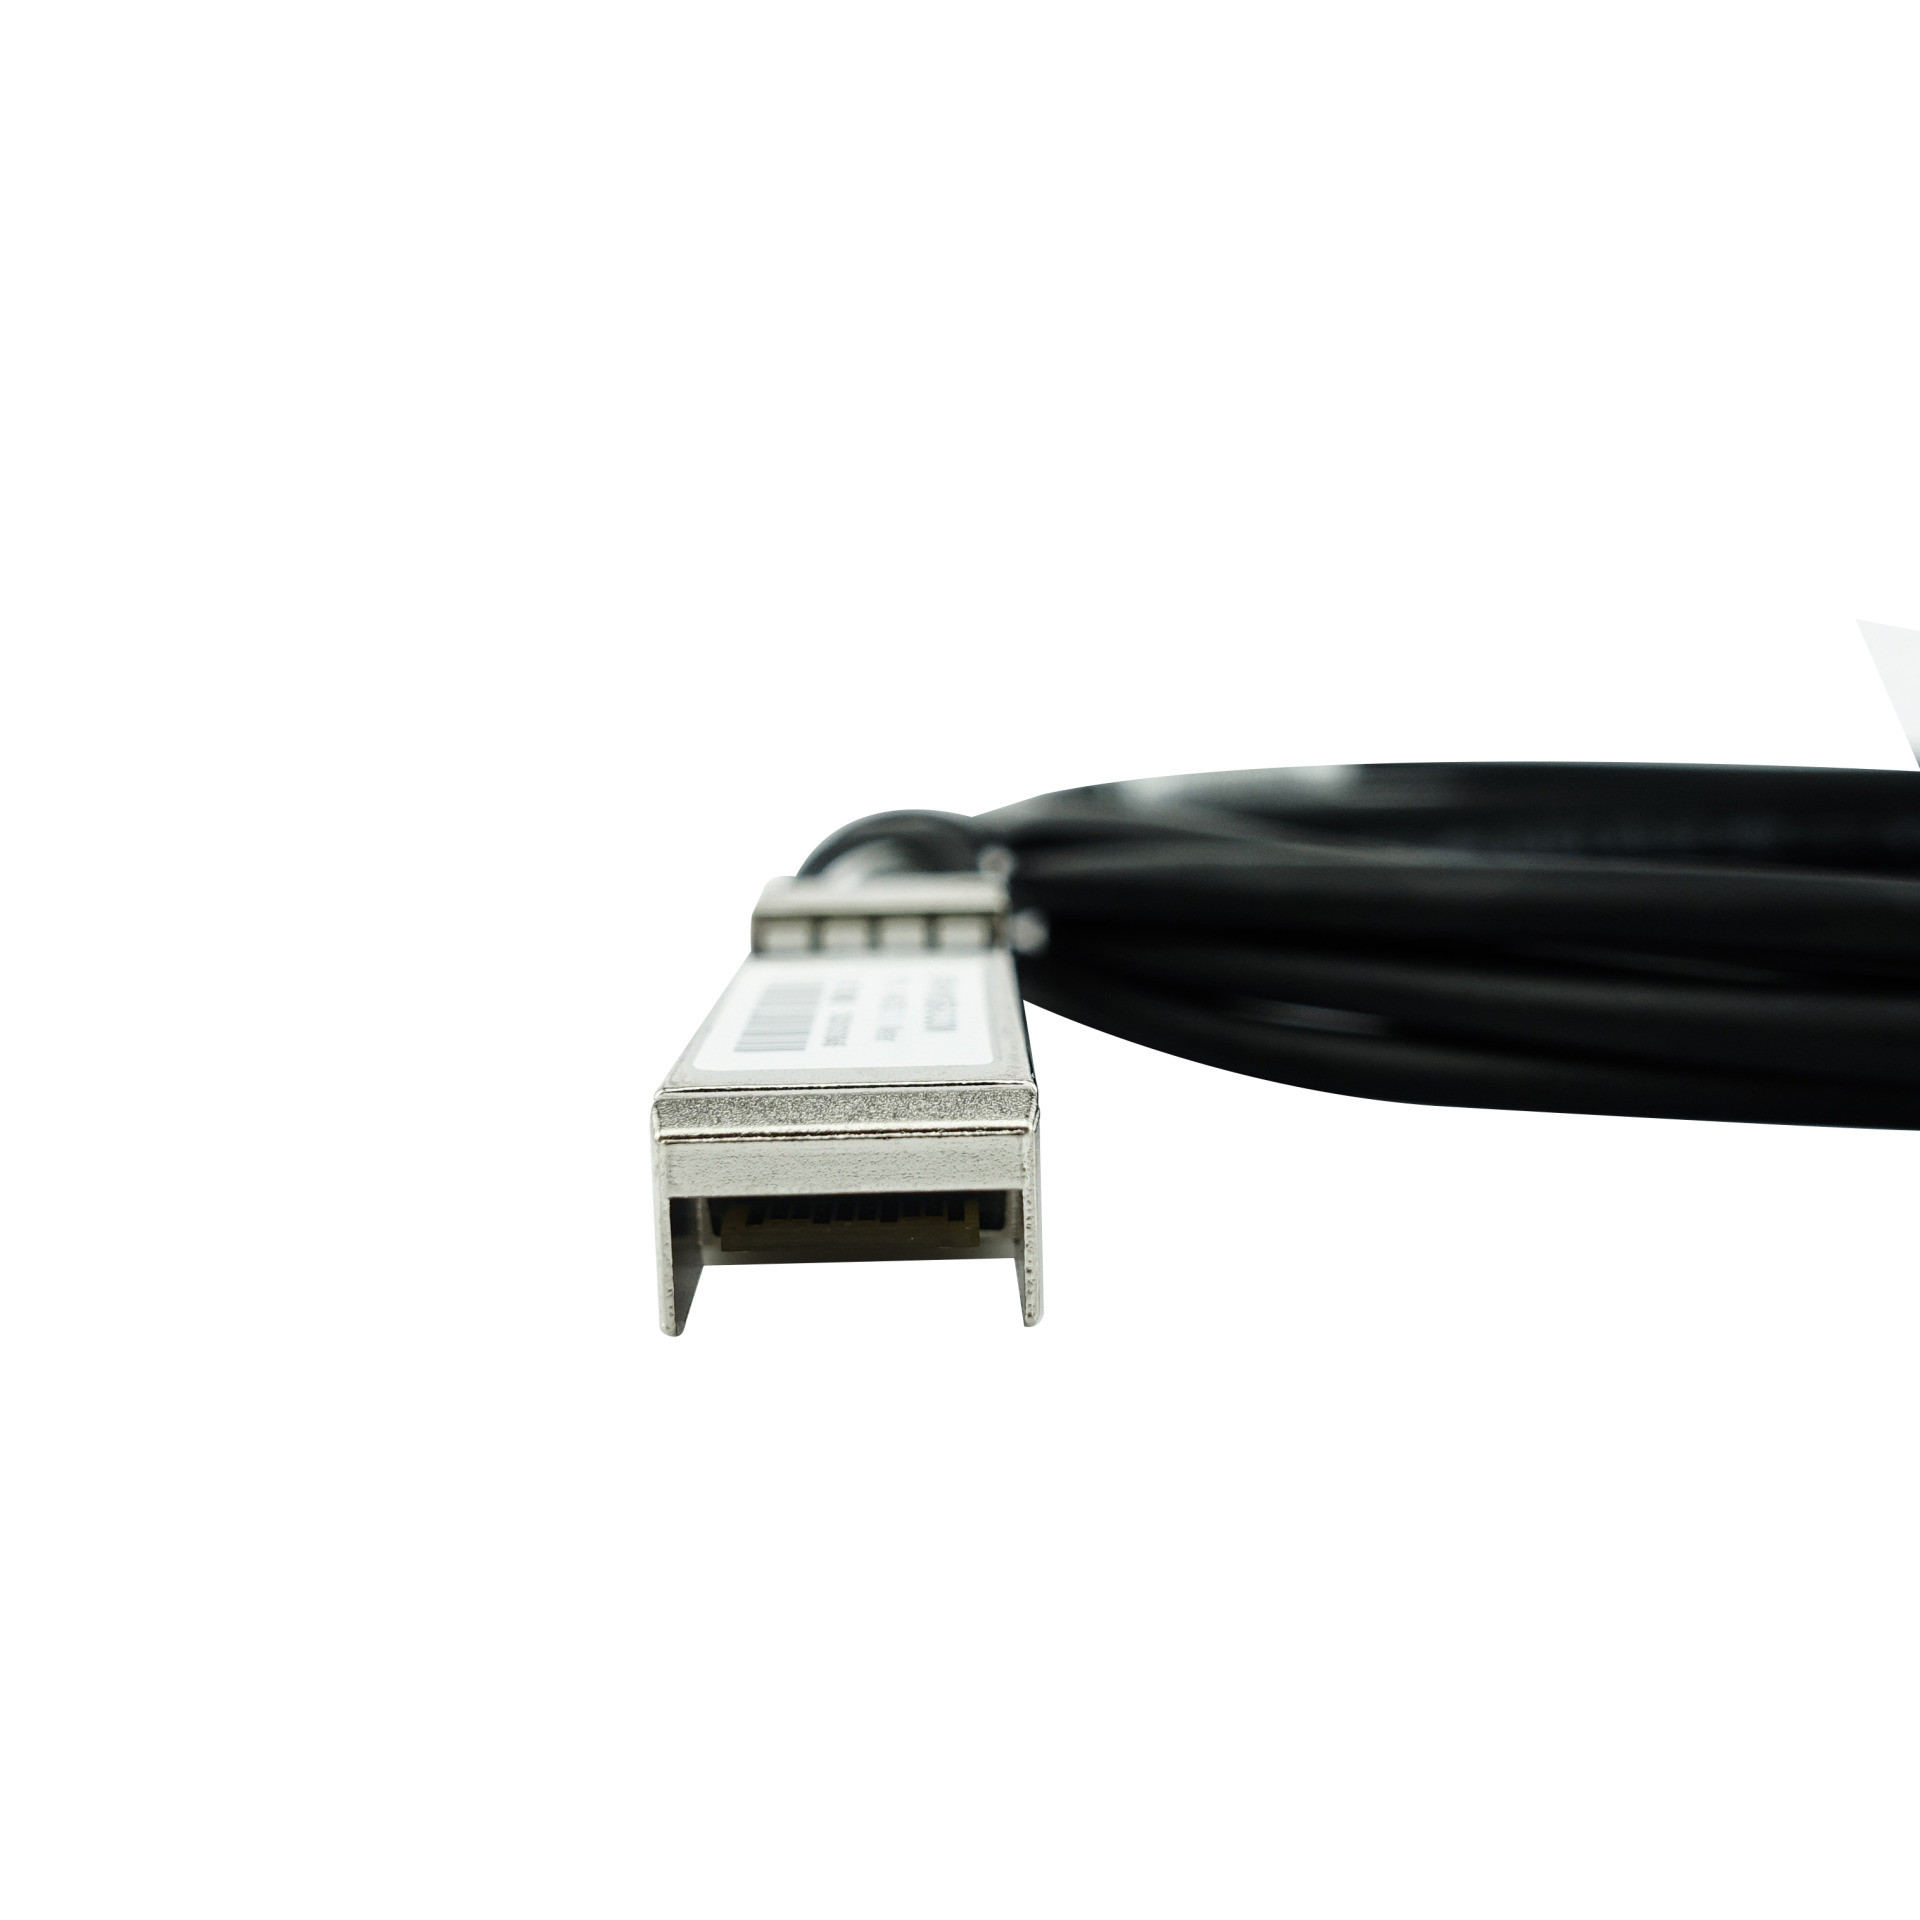 BlueLAN passive DAC Cable, SFP+ to SFP+, 10GBASE-CR, 1m, AWG30